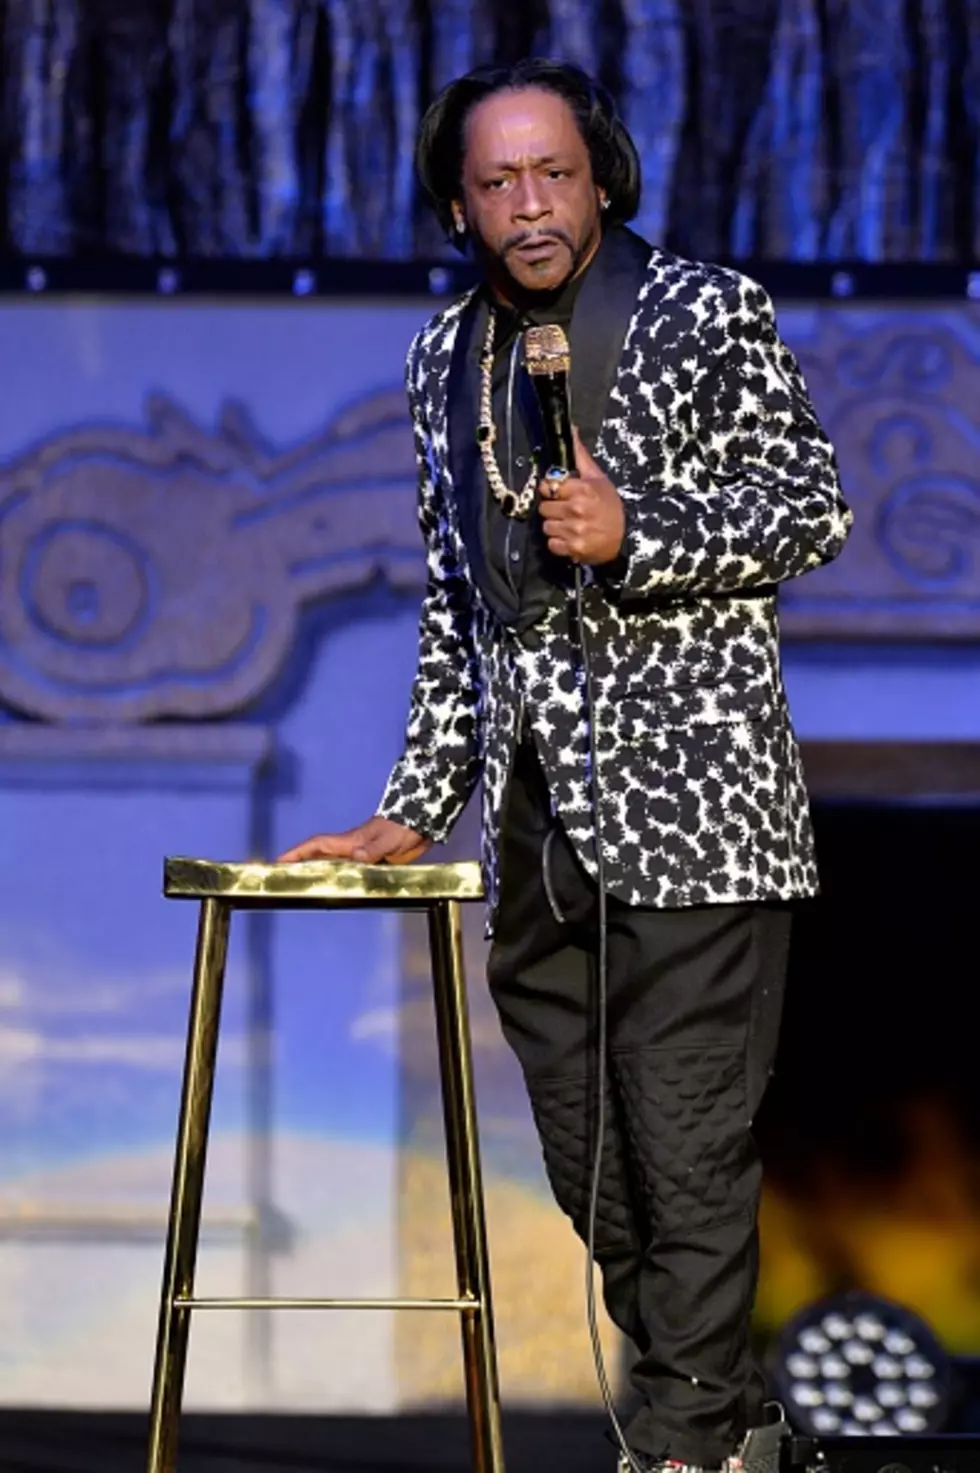 Katt Williams New Stand-Up Comedy Special Opens Today On Netflix